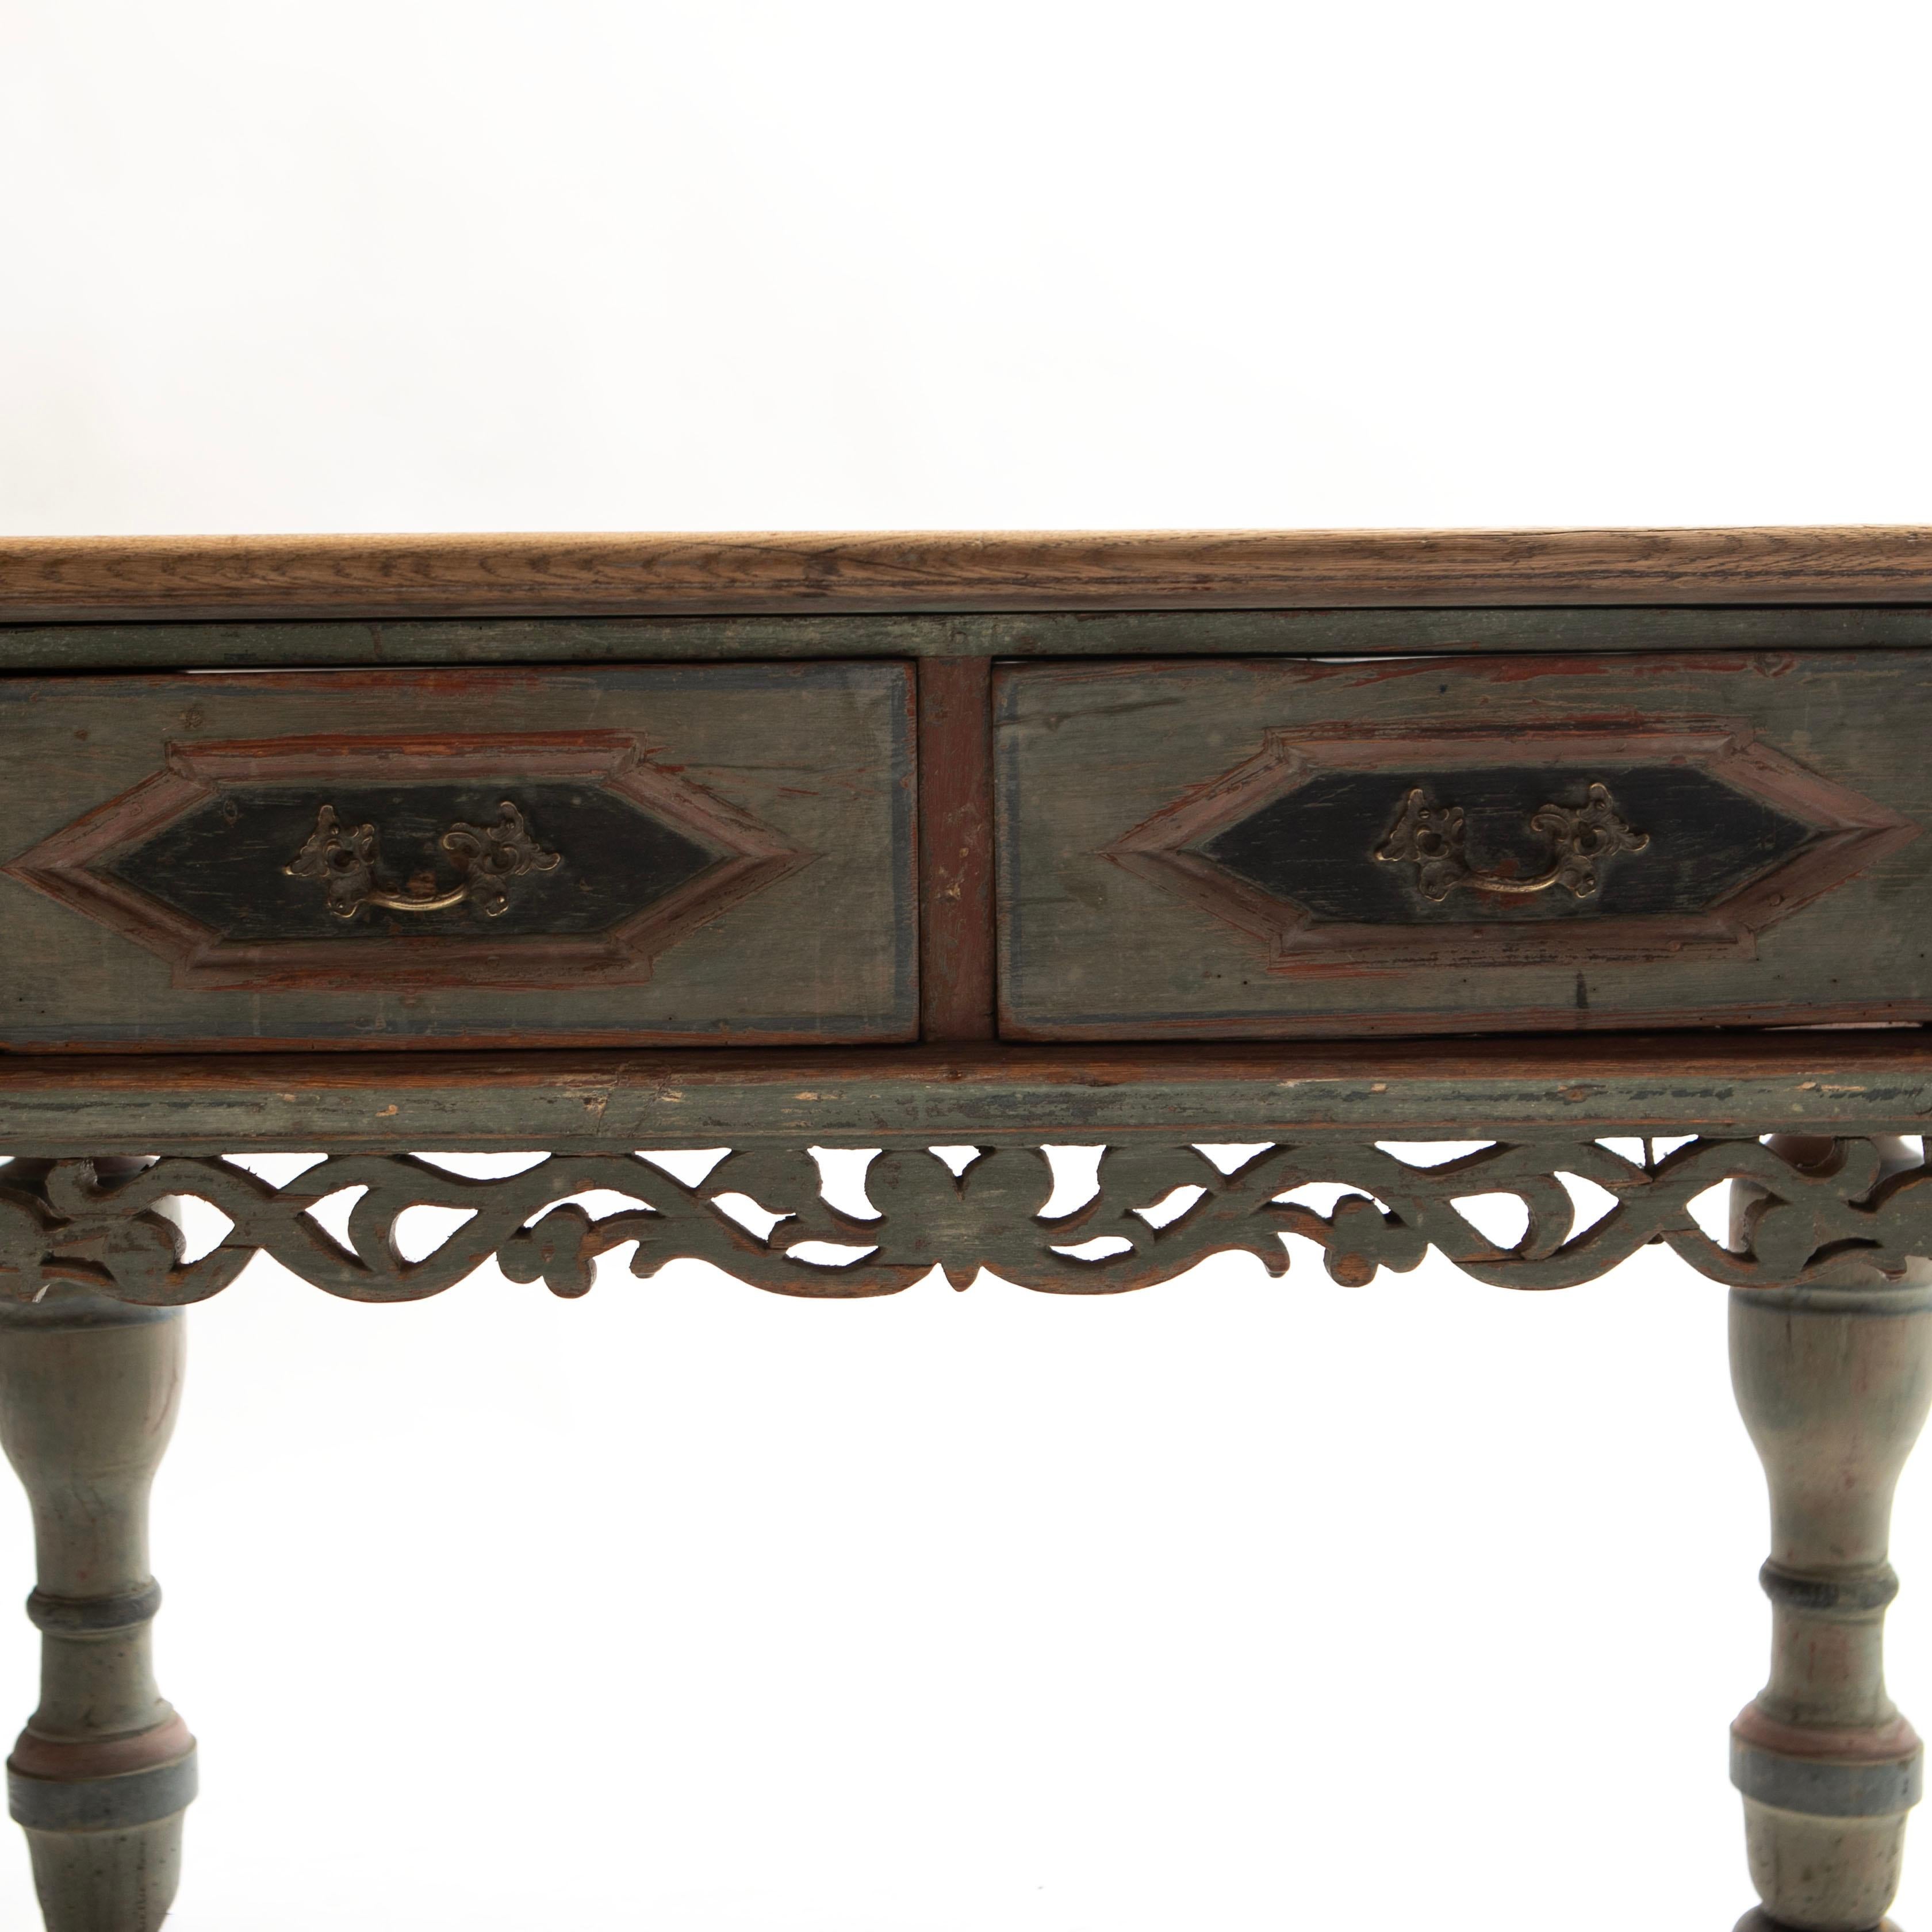 Danish 18th Century Baroque Table With Two Drawers and Original Paint For Sale 1